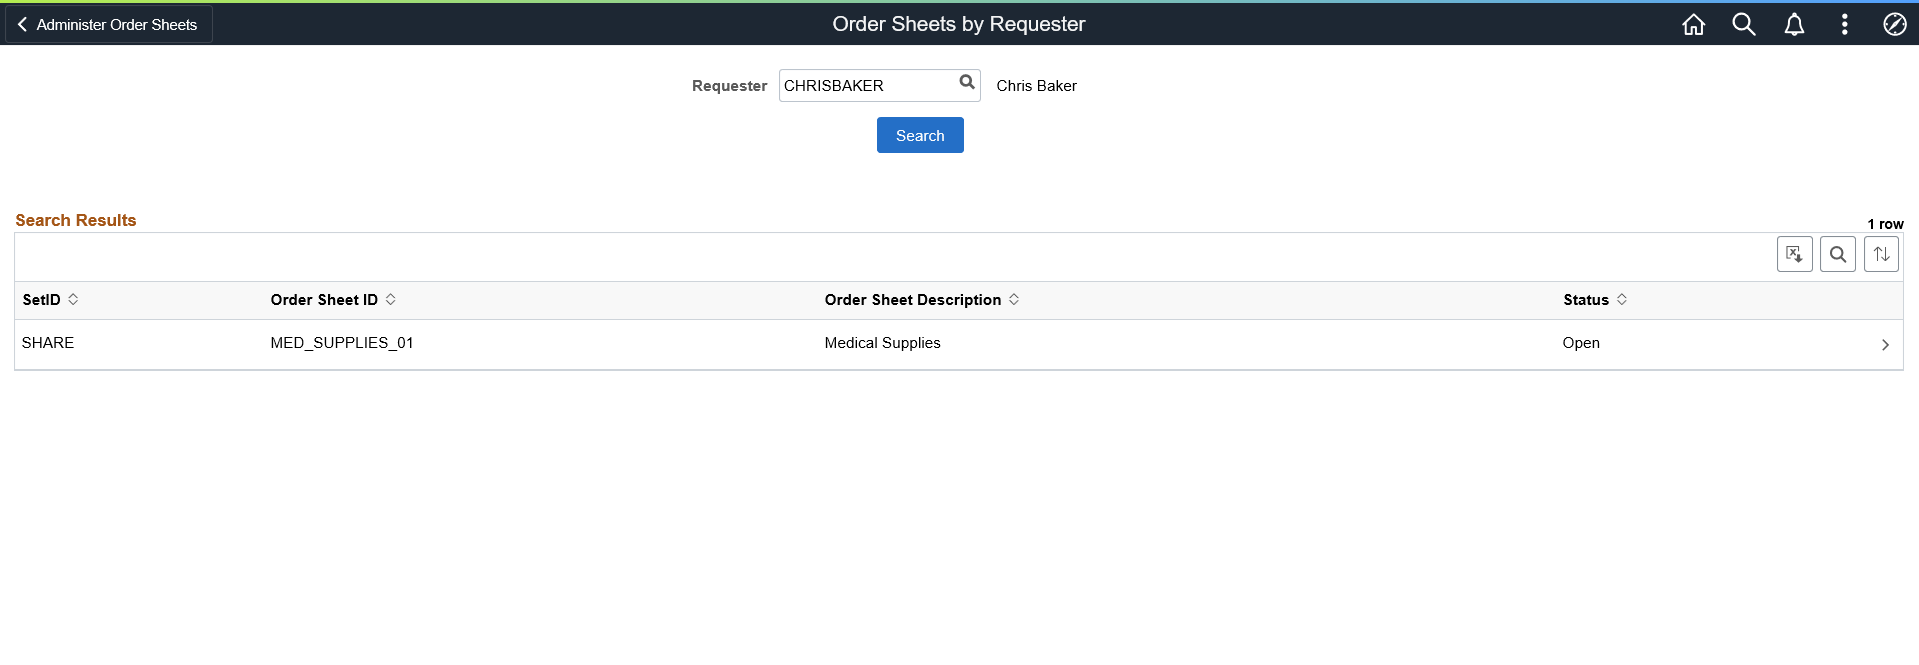 Order Sheets by Requester Page